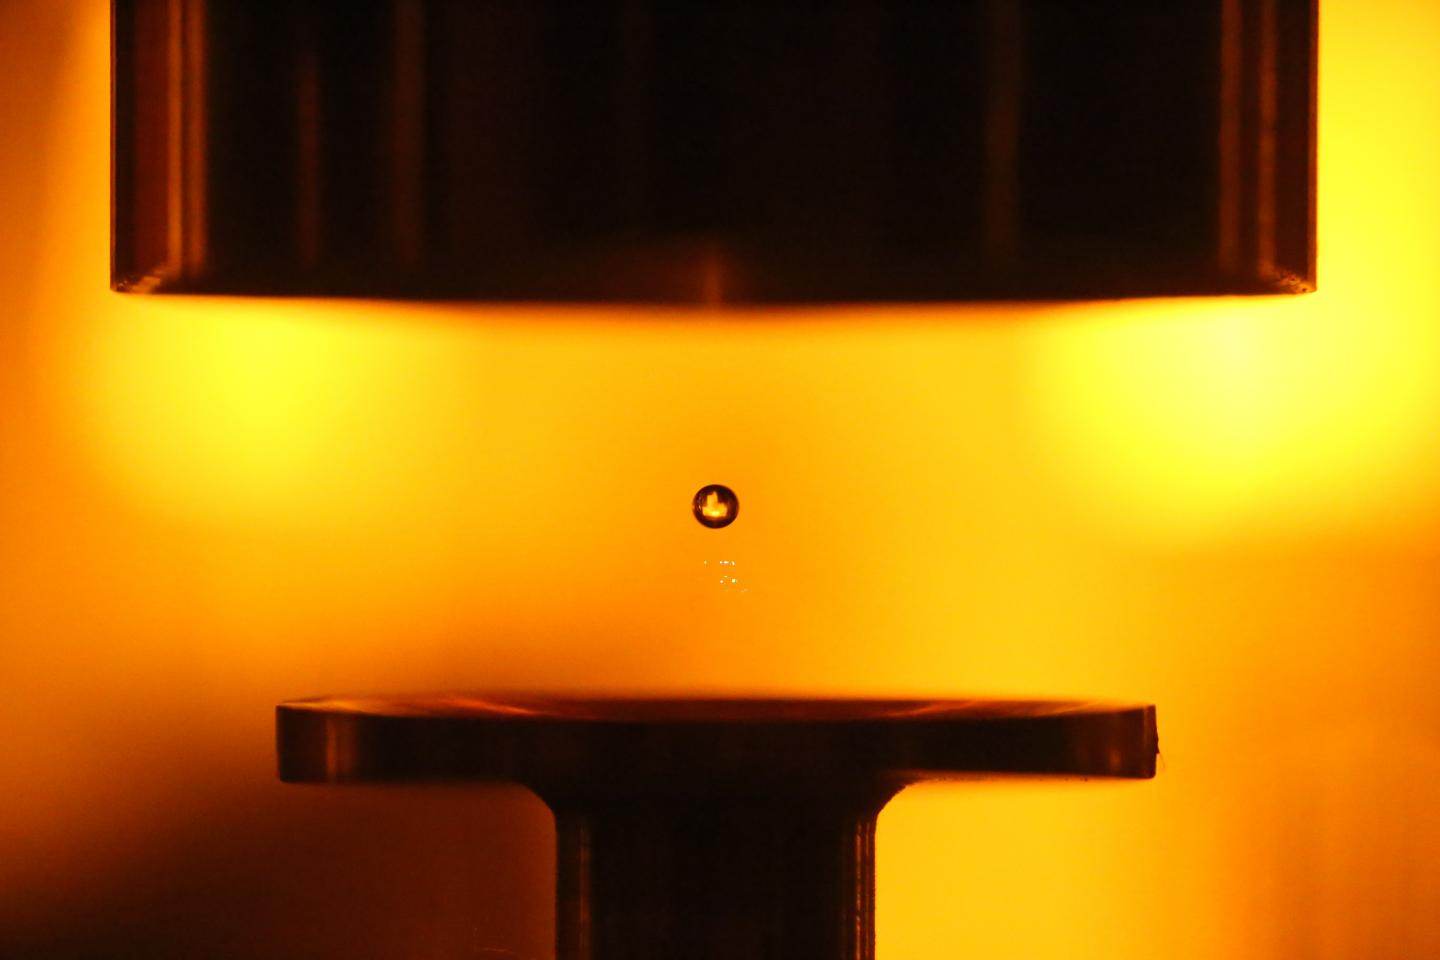 Researchers used sound waves to levitate droplets of water. This approach allows the water to evaporate, which concentrates the sample for spectroscopic detection of harmful heavy metal contaminants such as lead and mercury in water. Courtesy of Jairo Peralta and Victor Contreras, Instituto de Ciencias Físicas UNAM.